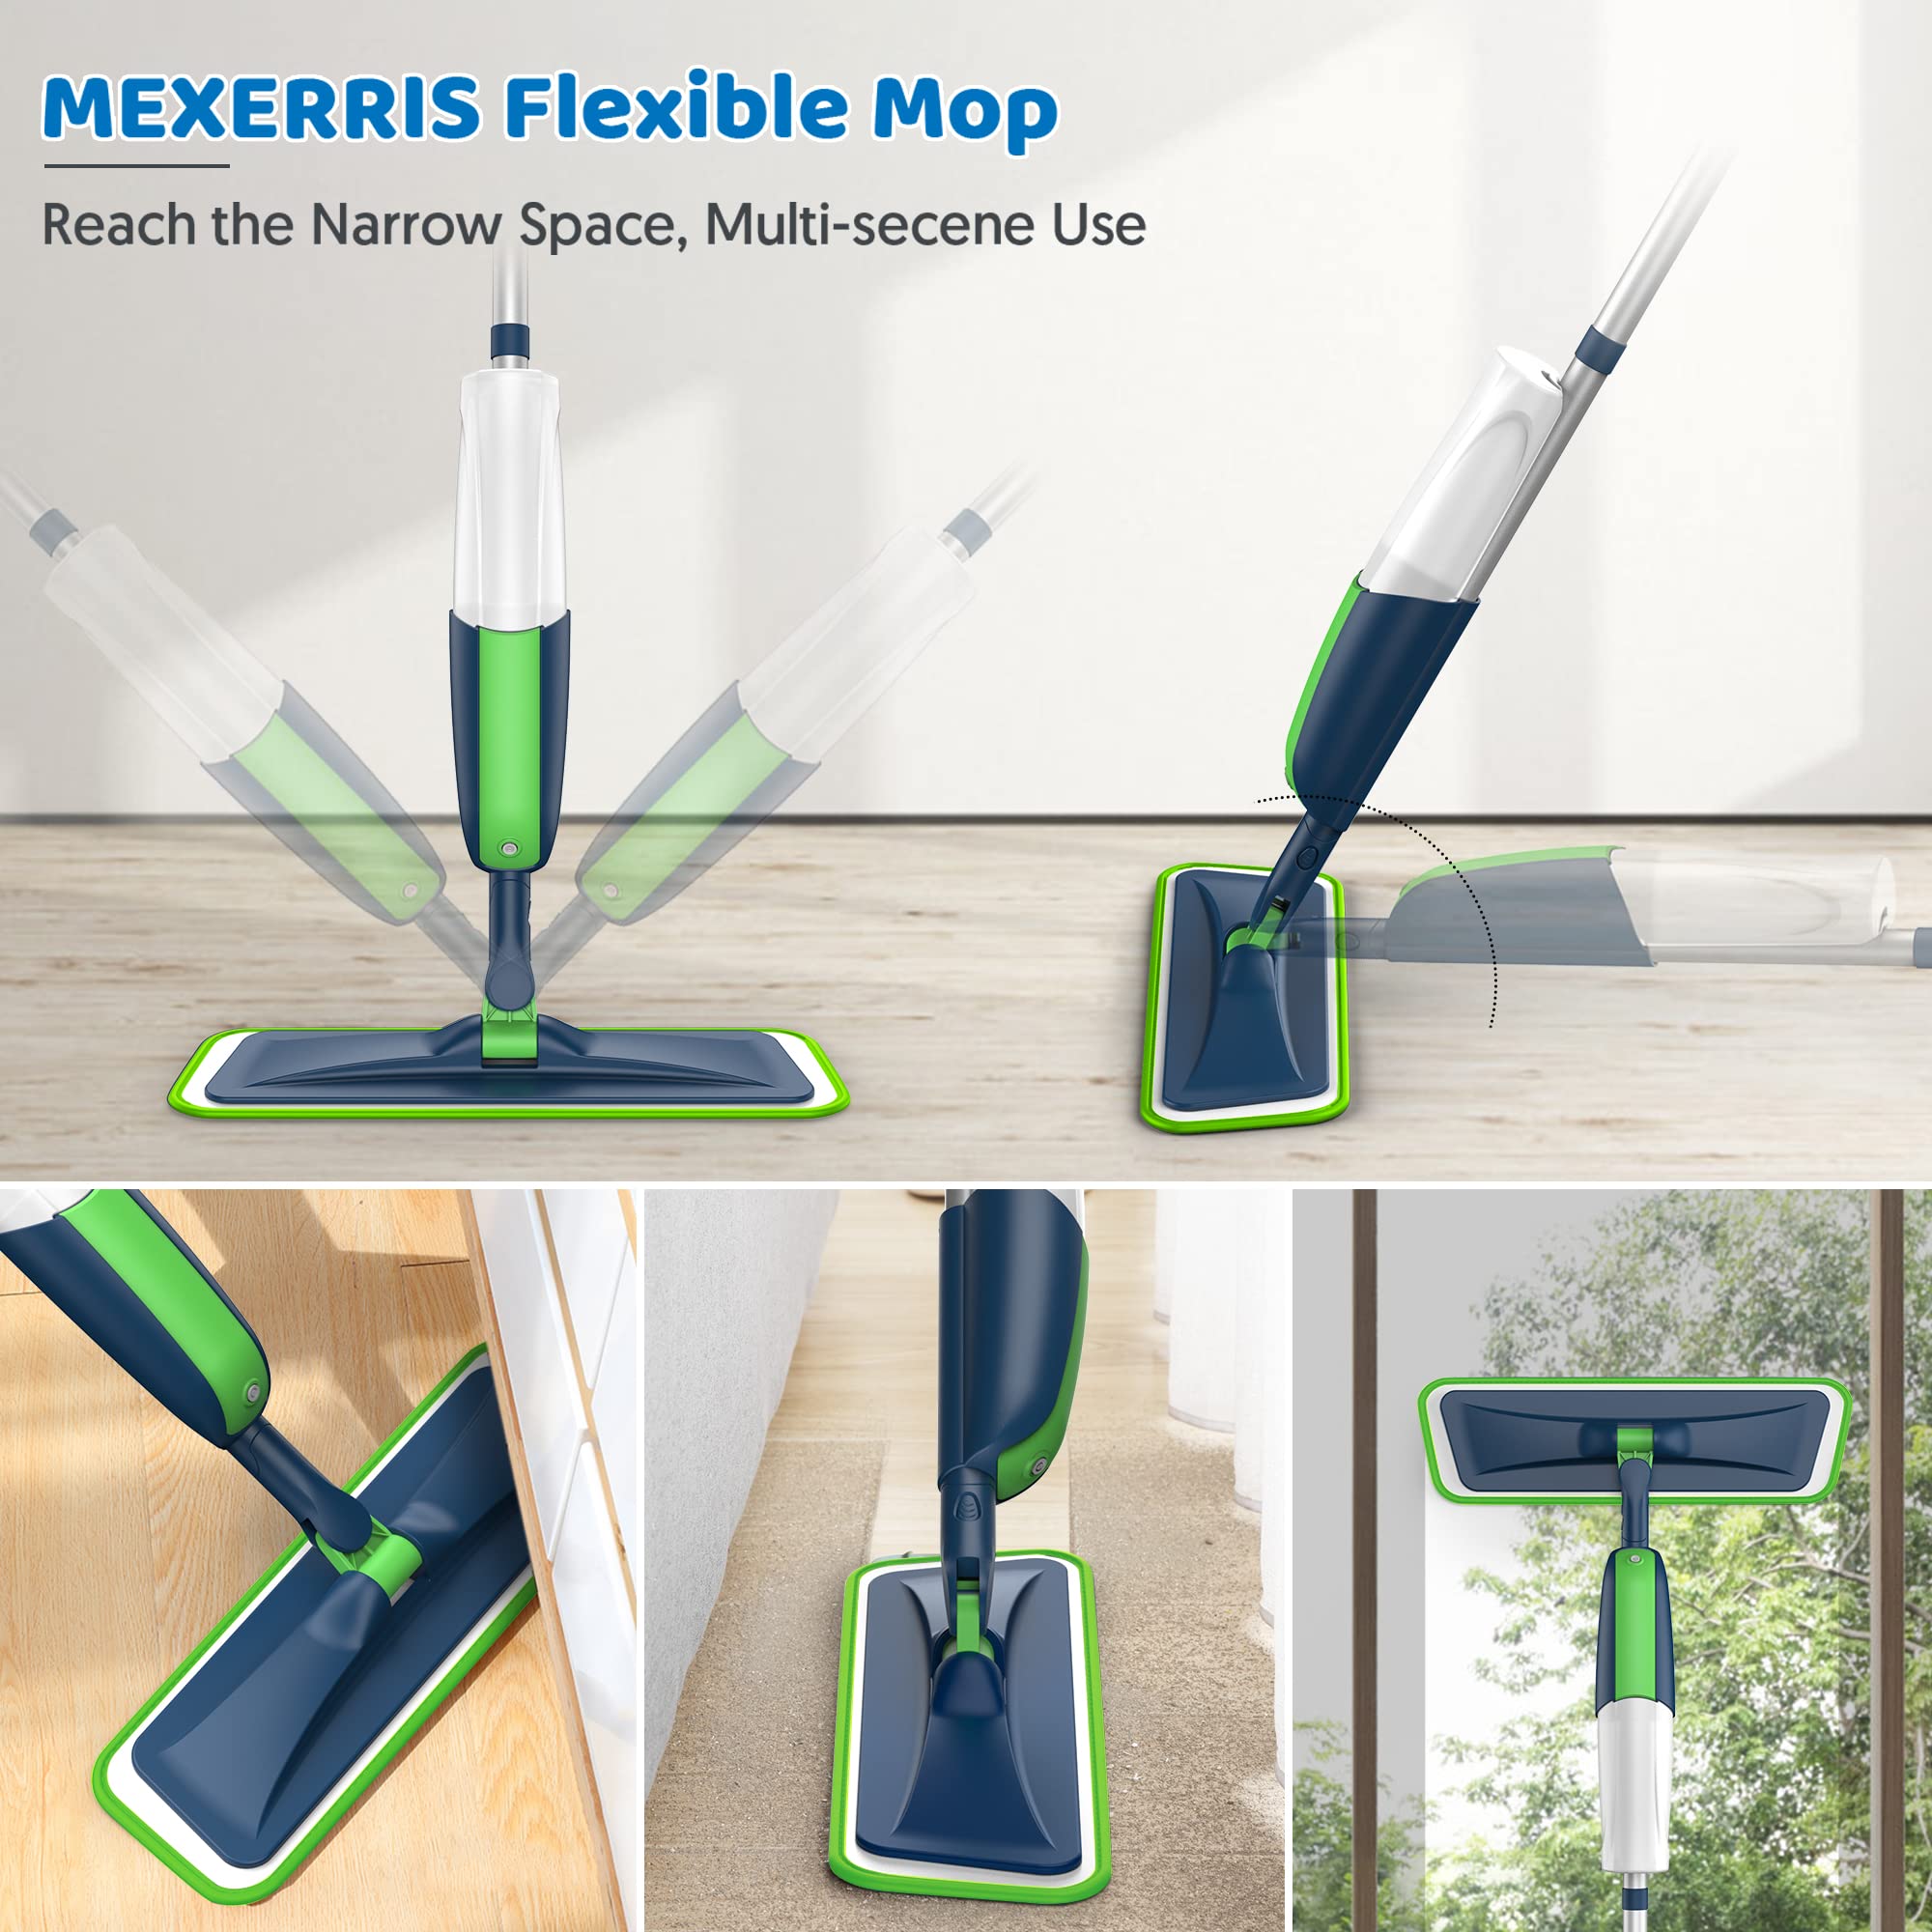 Spray Mops with 5 Mop Pads 2 Refillable Bottle - MEXERRIS Wet Dust Mops for Floor Cleaning Microfiber Hardwood Floor Cleaning Mop with Spray Dry Mops Flat Mops for Laminate Wood Ceramic Floor Cleaning